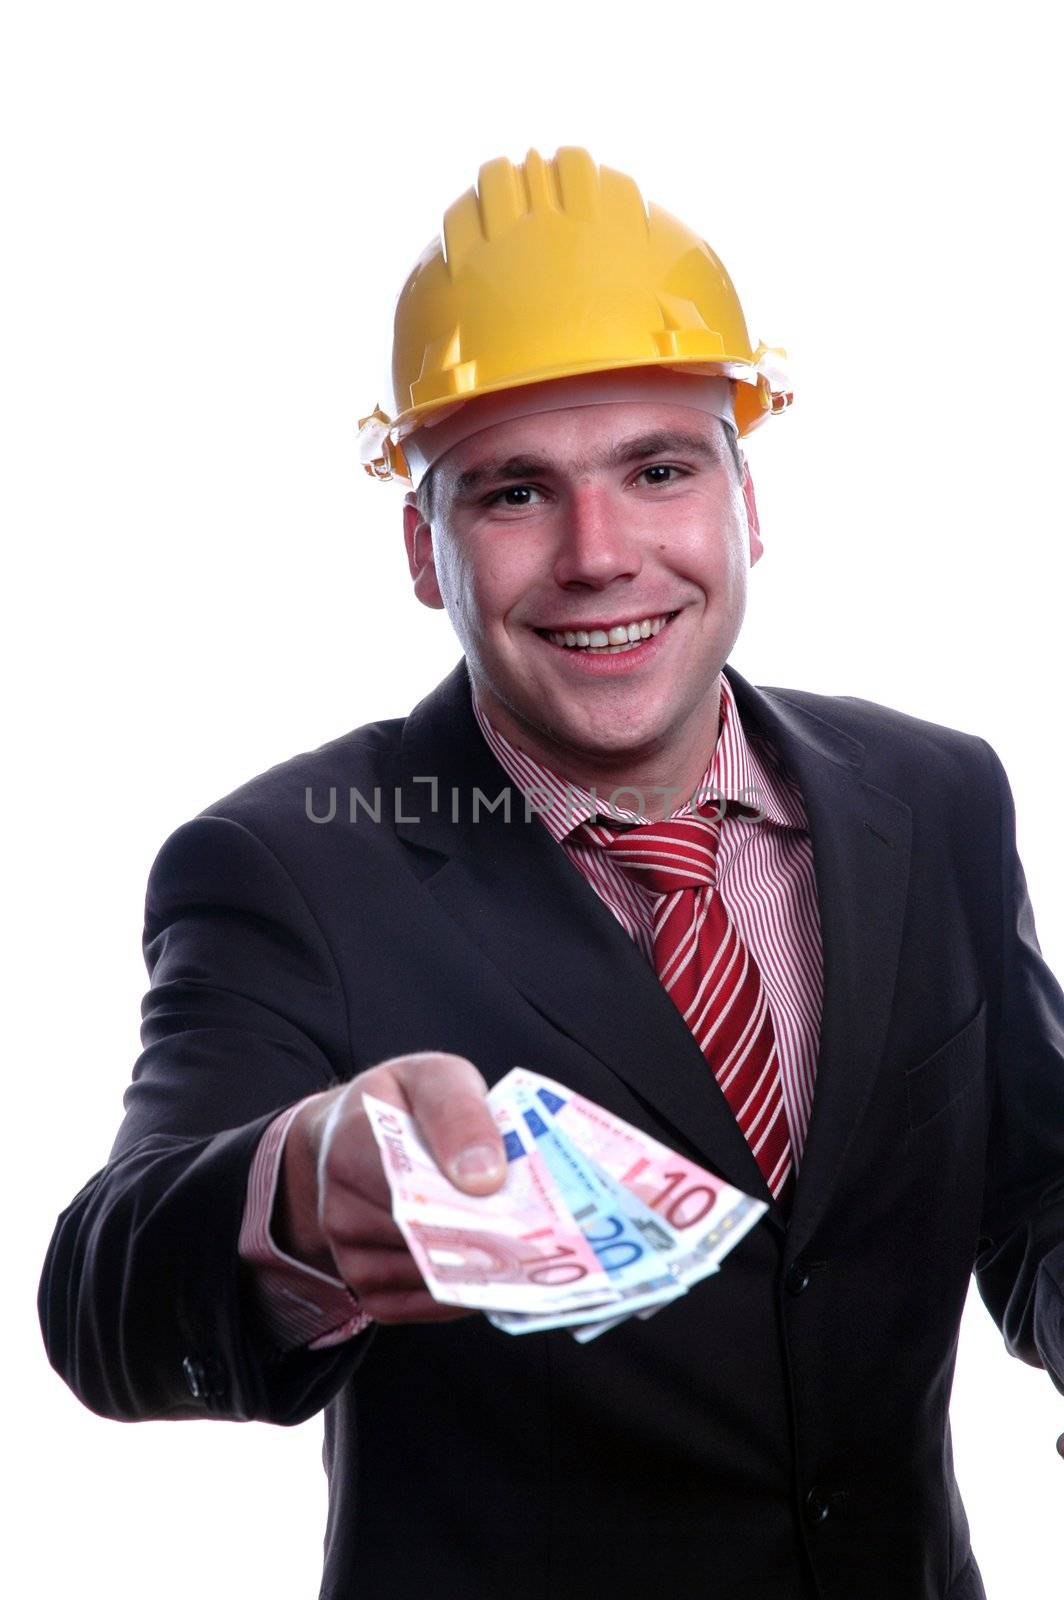 young engineer with helmet and holding banknotes by raalves